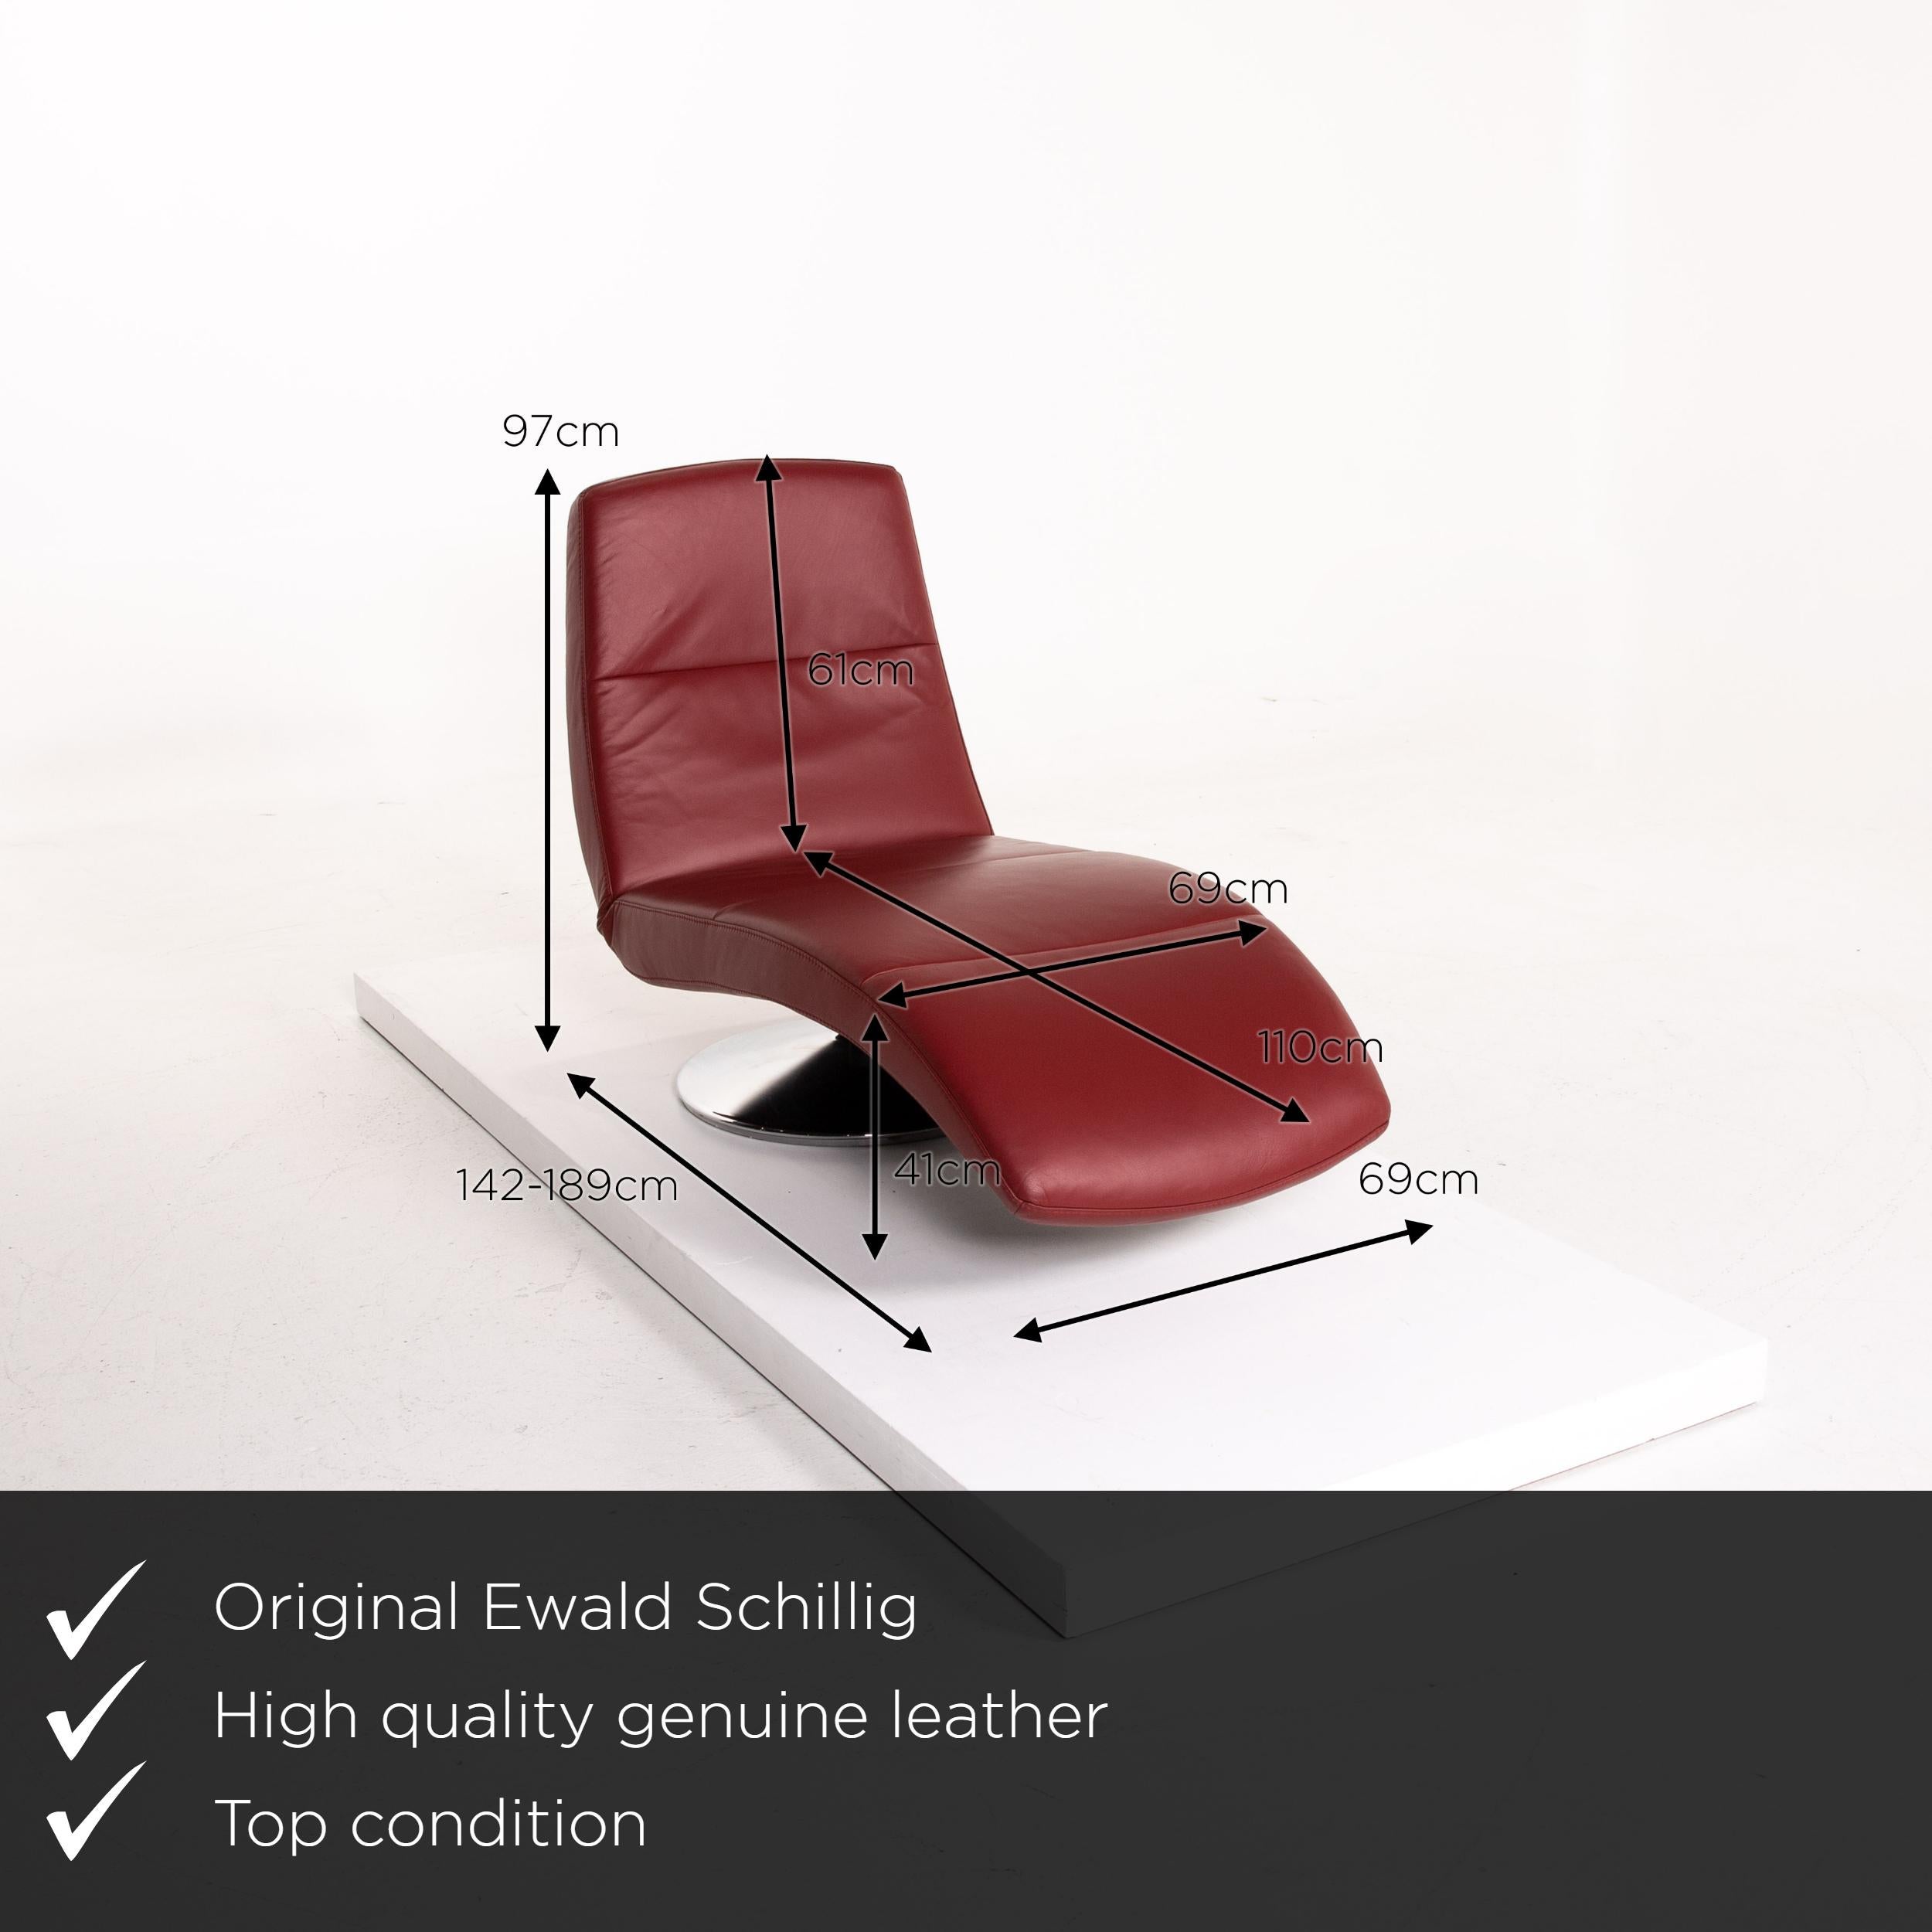 We present to you an Ewald Schillig leather lounger red relax lounger relax function function relax.
   
 

 Product measurements in centimeters:
 

Depth 142
Width 69
Height 97
Seat height 41
Seat depth 110
Seat width 69
Back height